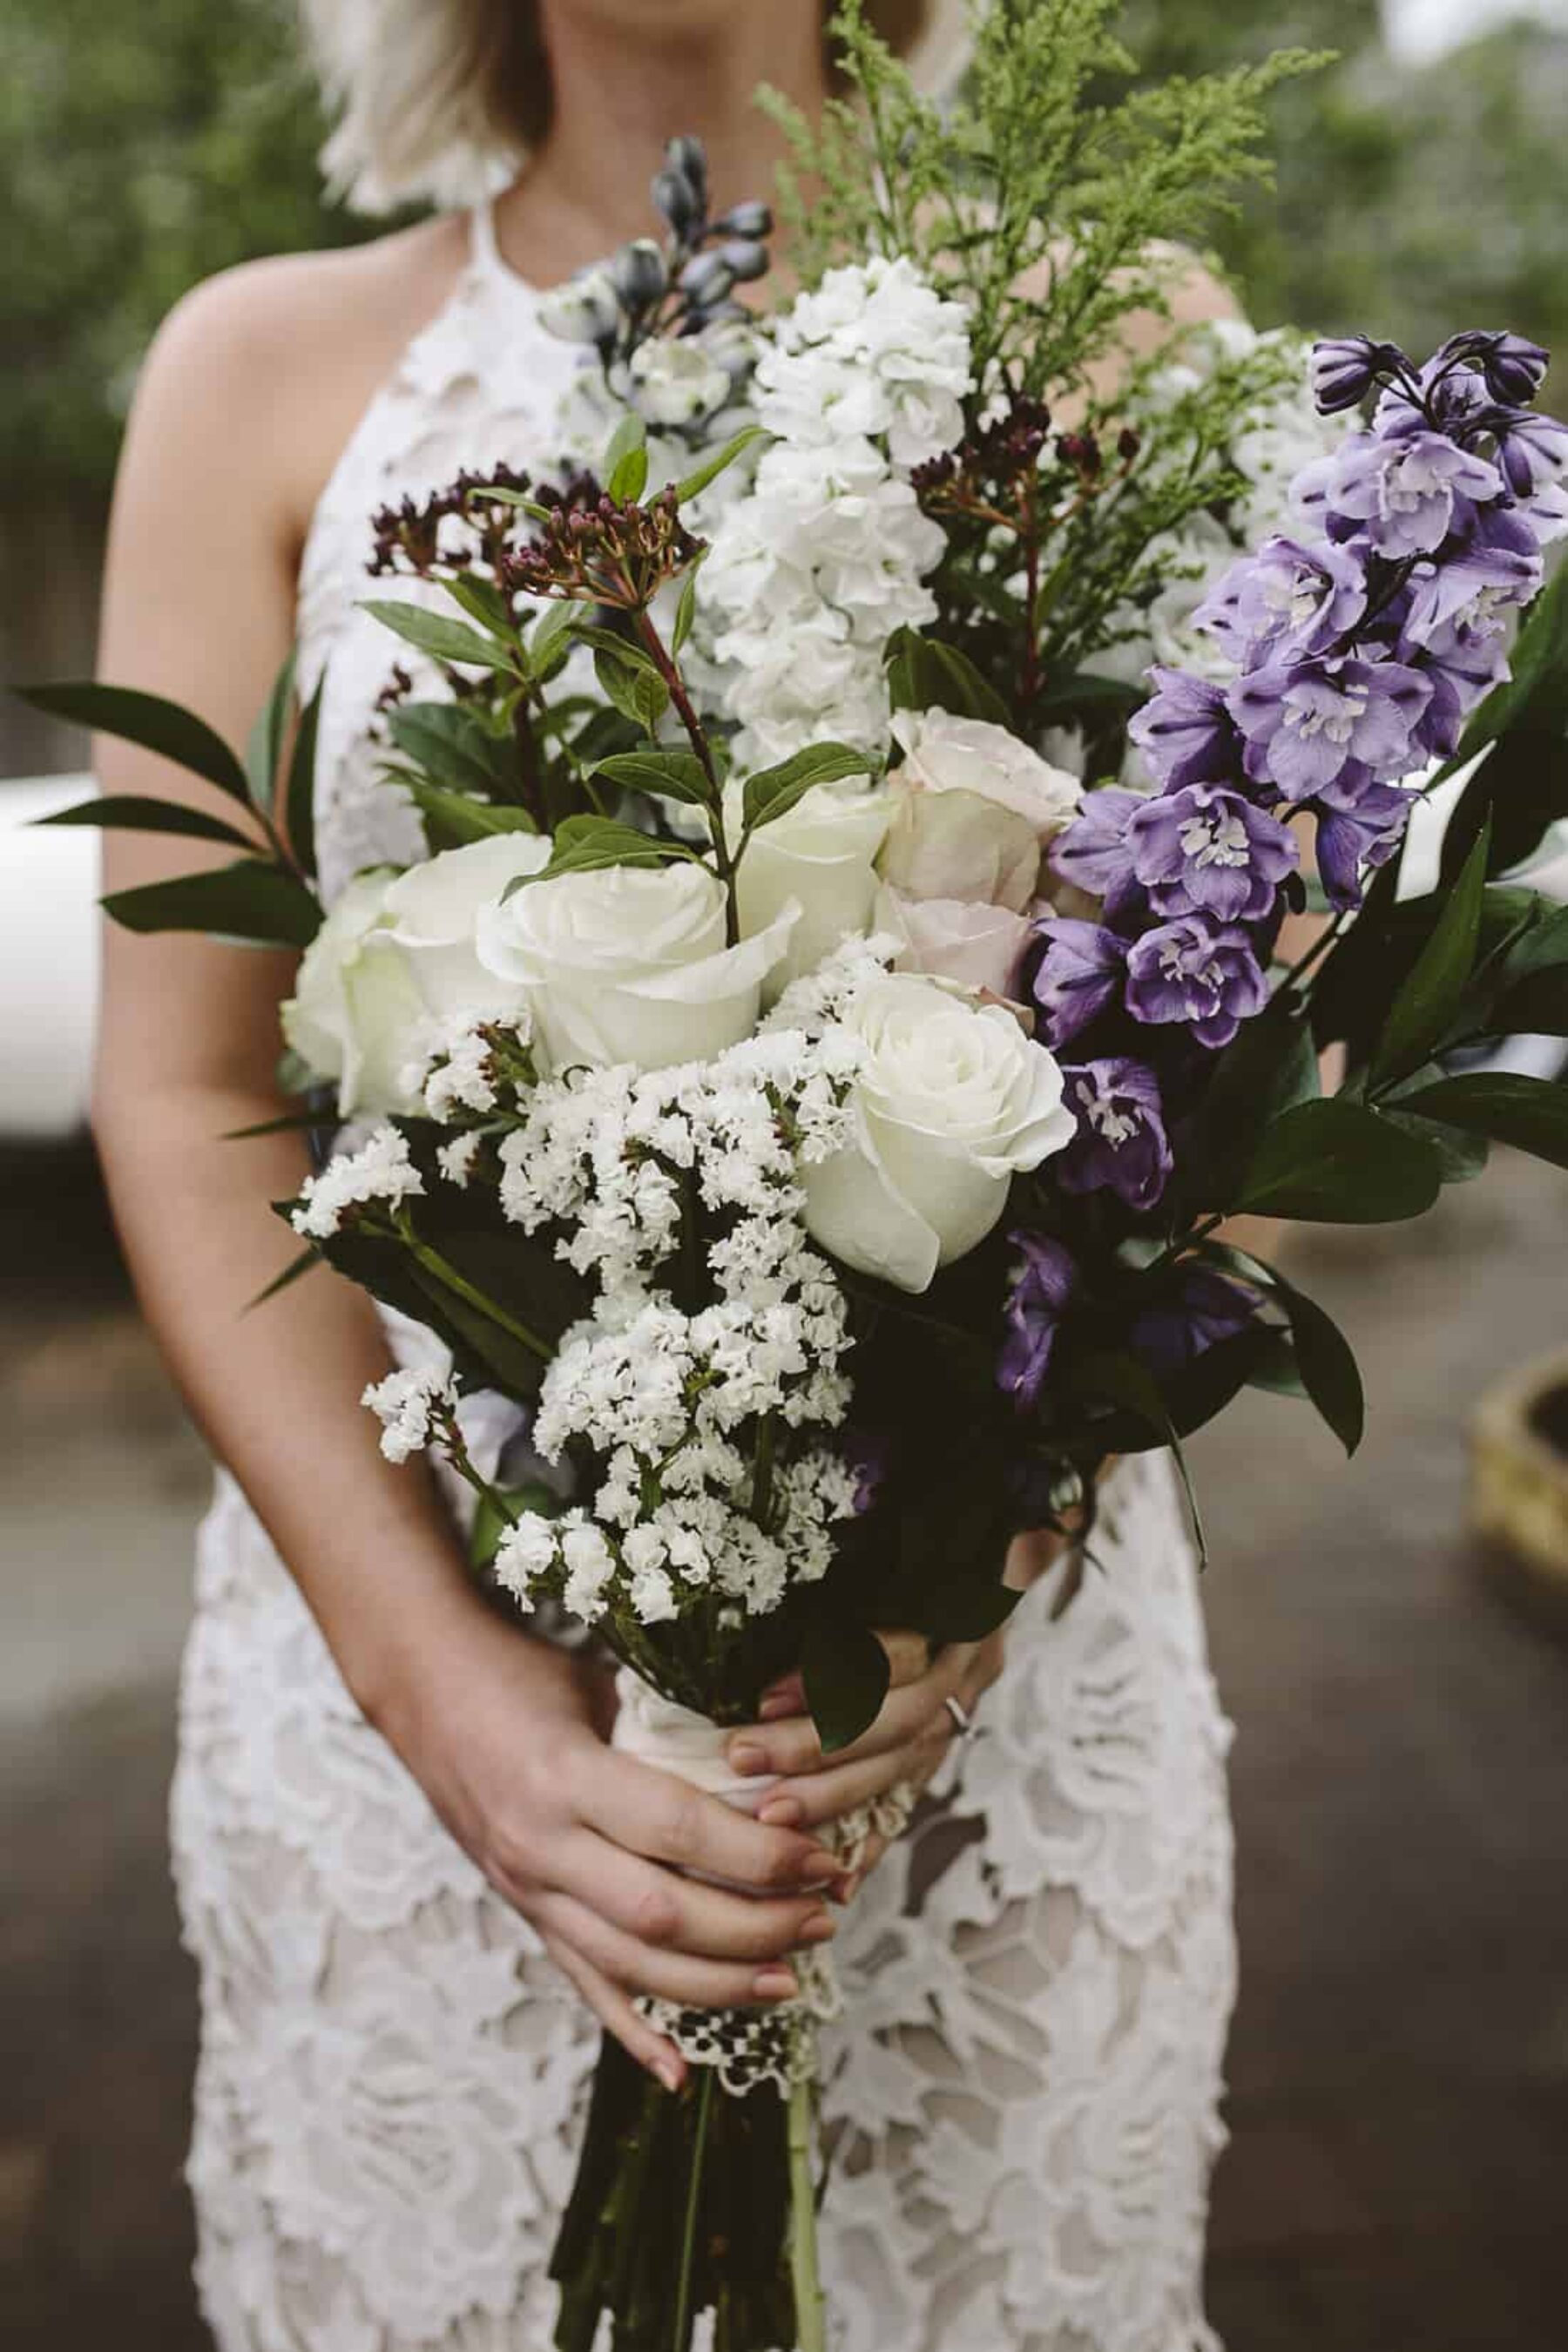 DIY wedding bouquet with foxglove and white roses